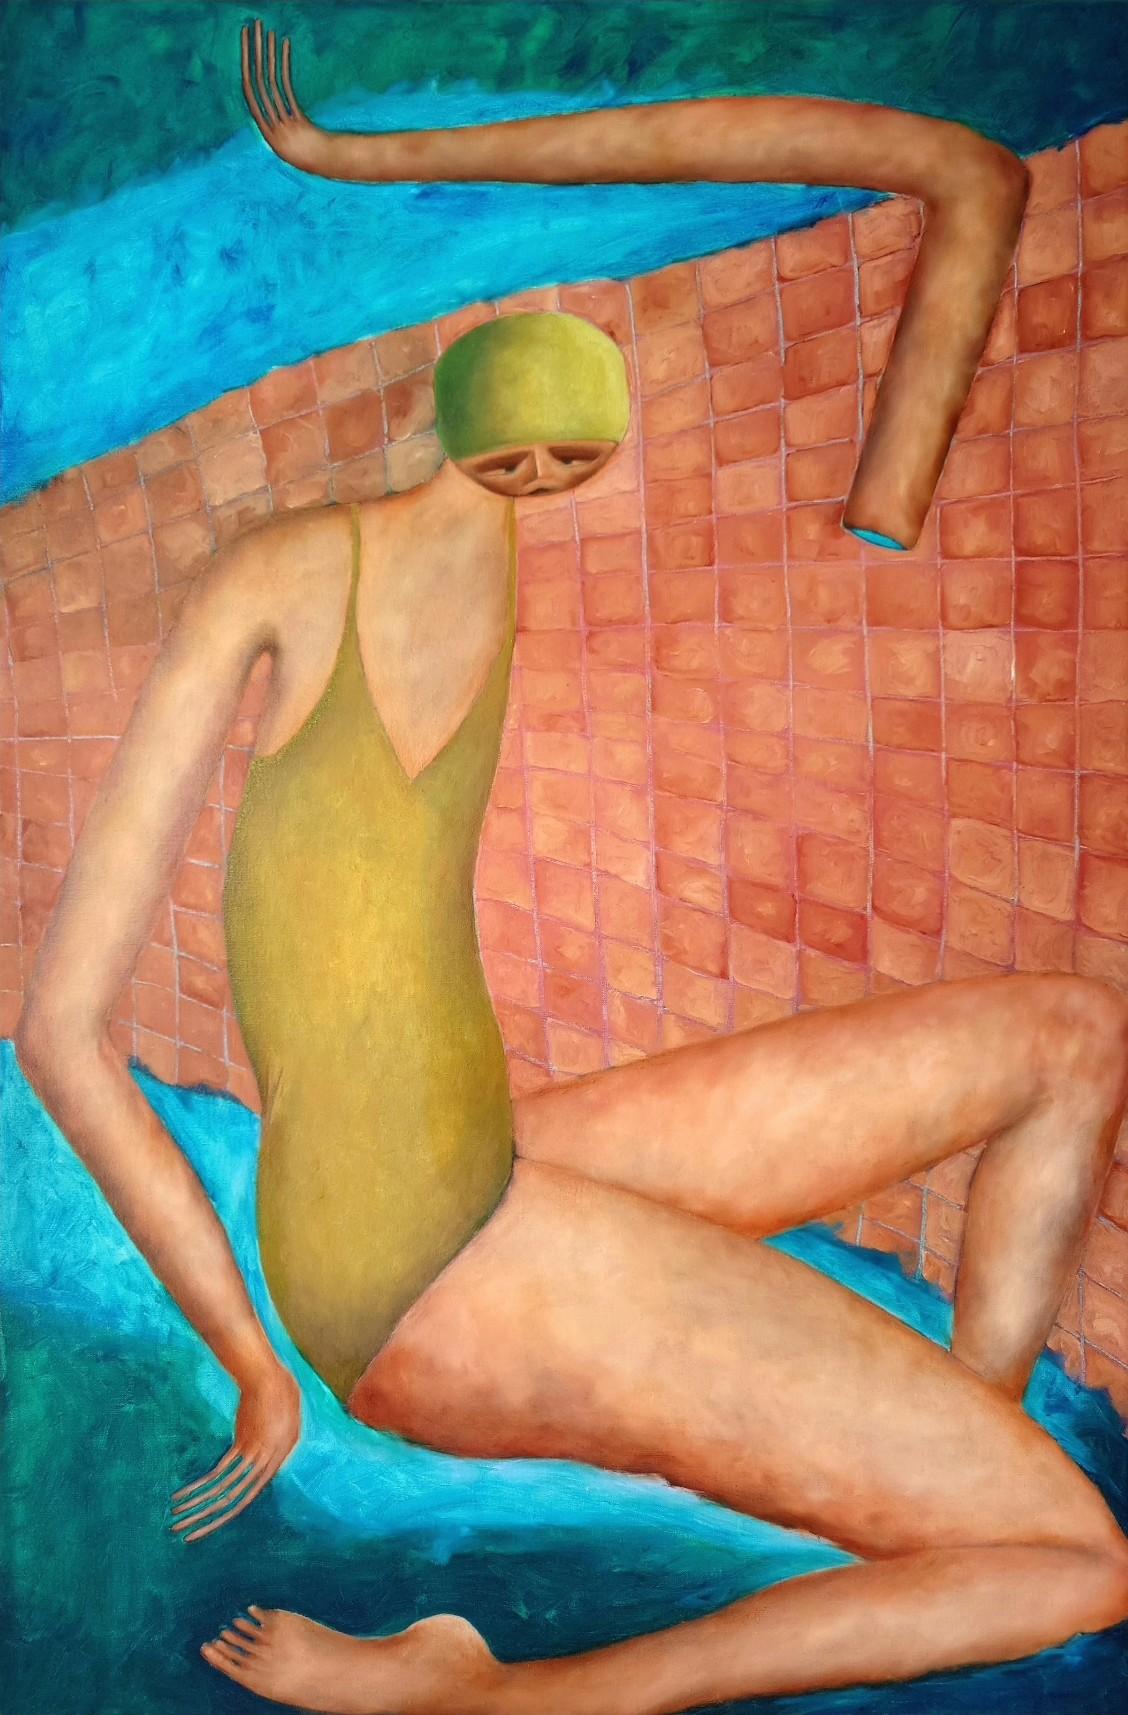 "Going for a Swim" Oil on Canvas Figurative Painting 2023

Artwork on supported wooden frame. Ready to hang.

"A quiet moment for introspection and disconnection. The elongated limbs and disjointed composition reflect the inner turmoil and